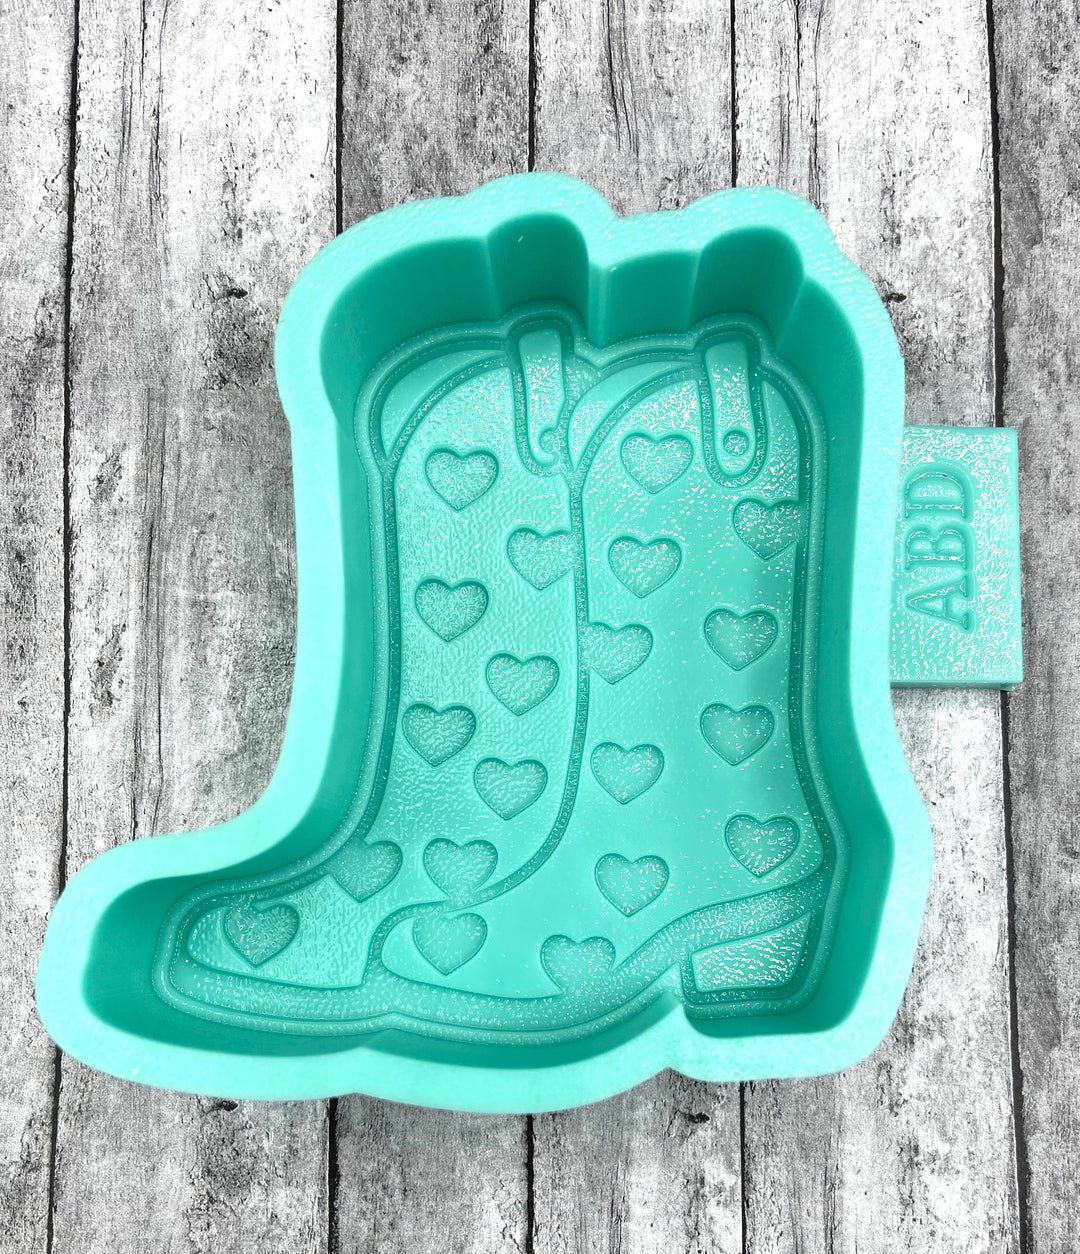 Heart Boots Freshie Silicone Mold